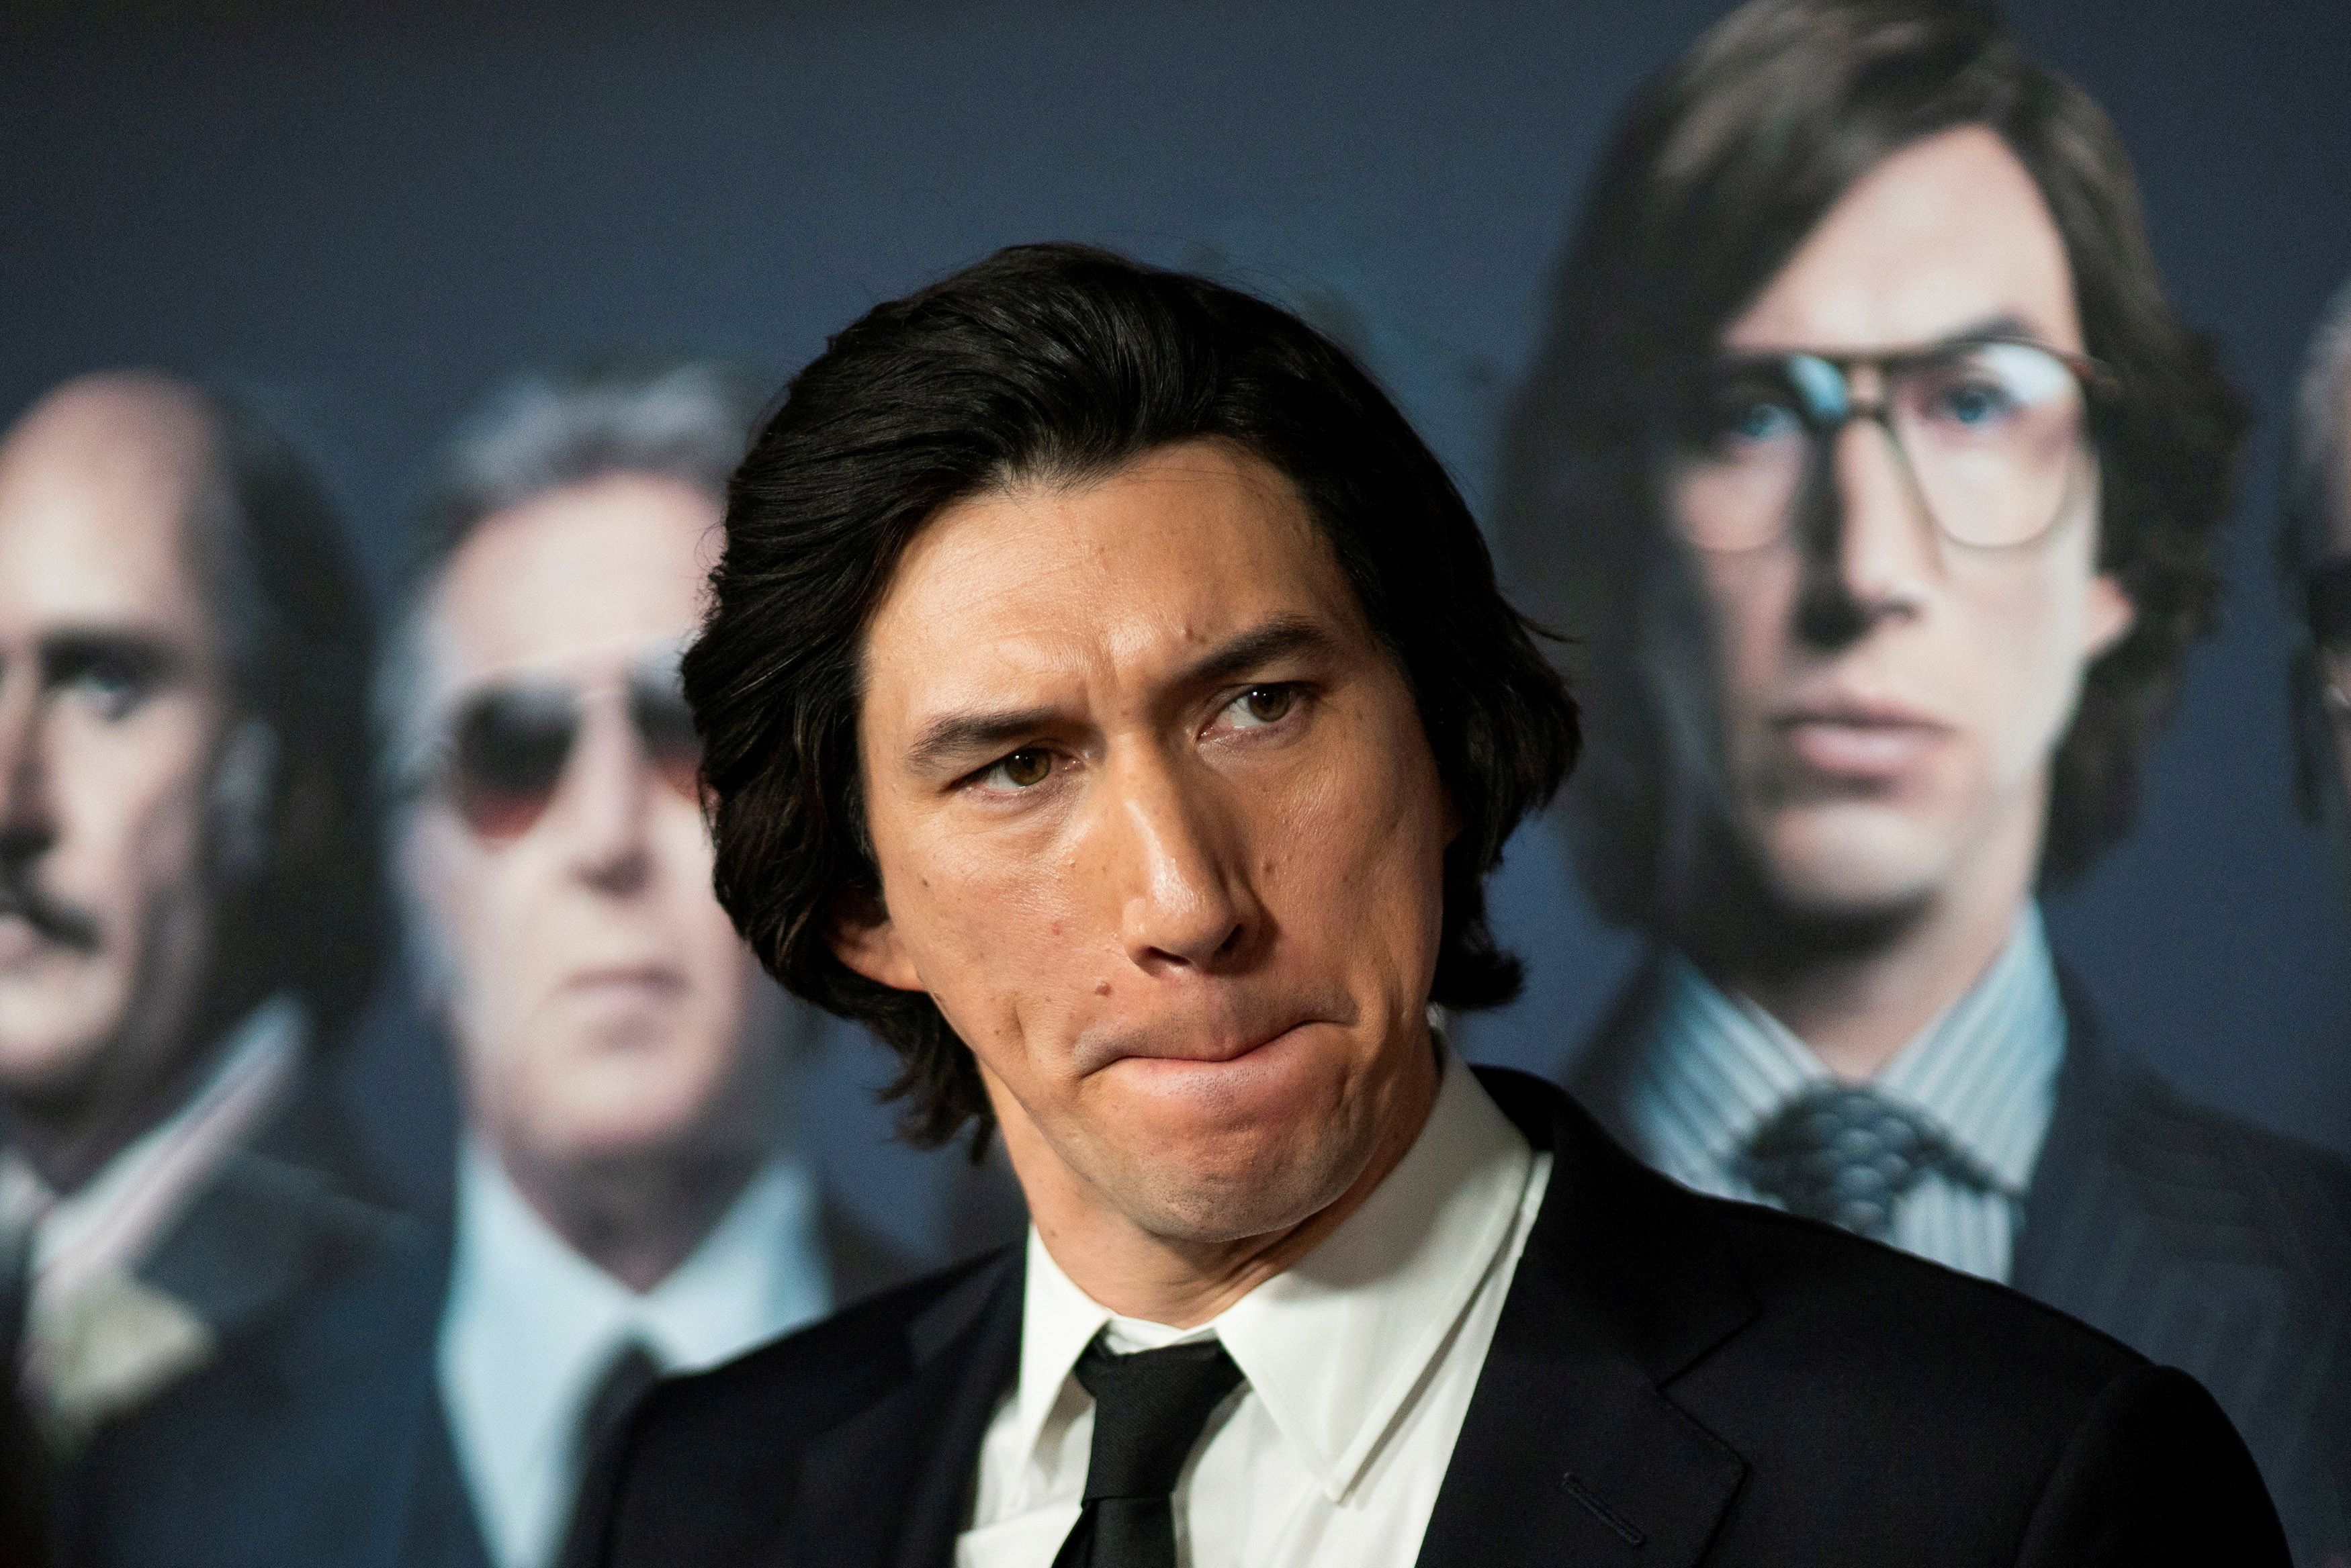 Adam Driver is again put under the orders of Noah Baumbach (together they filmed "story of a marriage"). Now they come with the film "White Noise". (REUTERS/Eduardo Munoz)